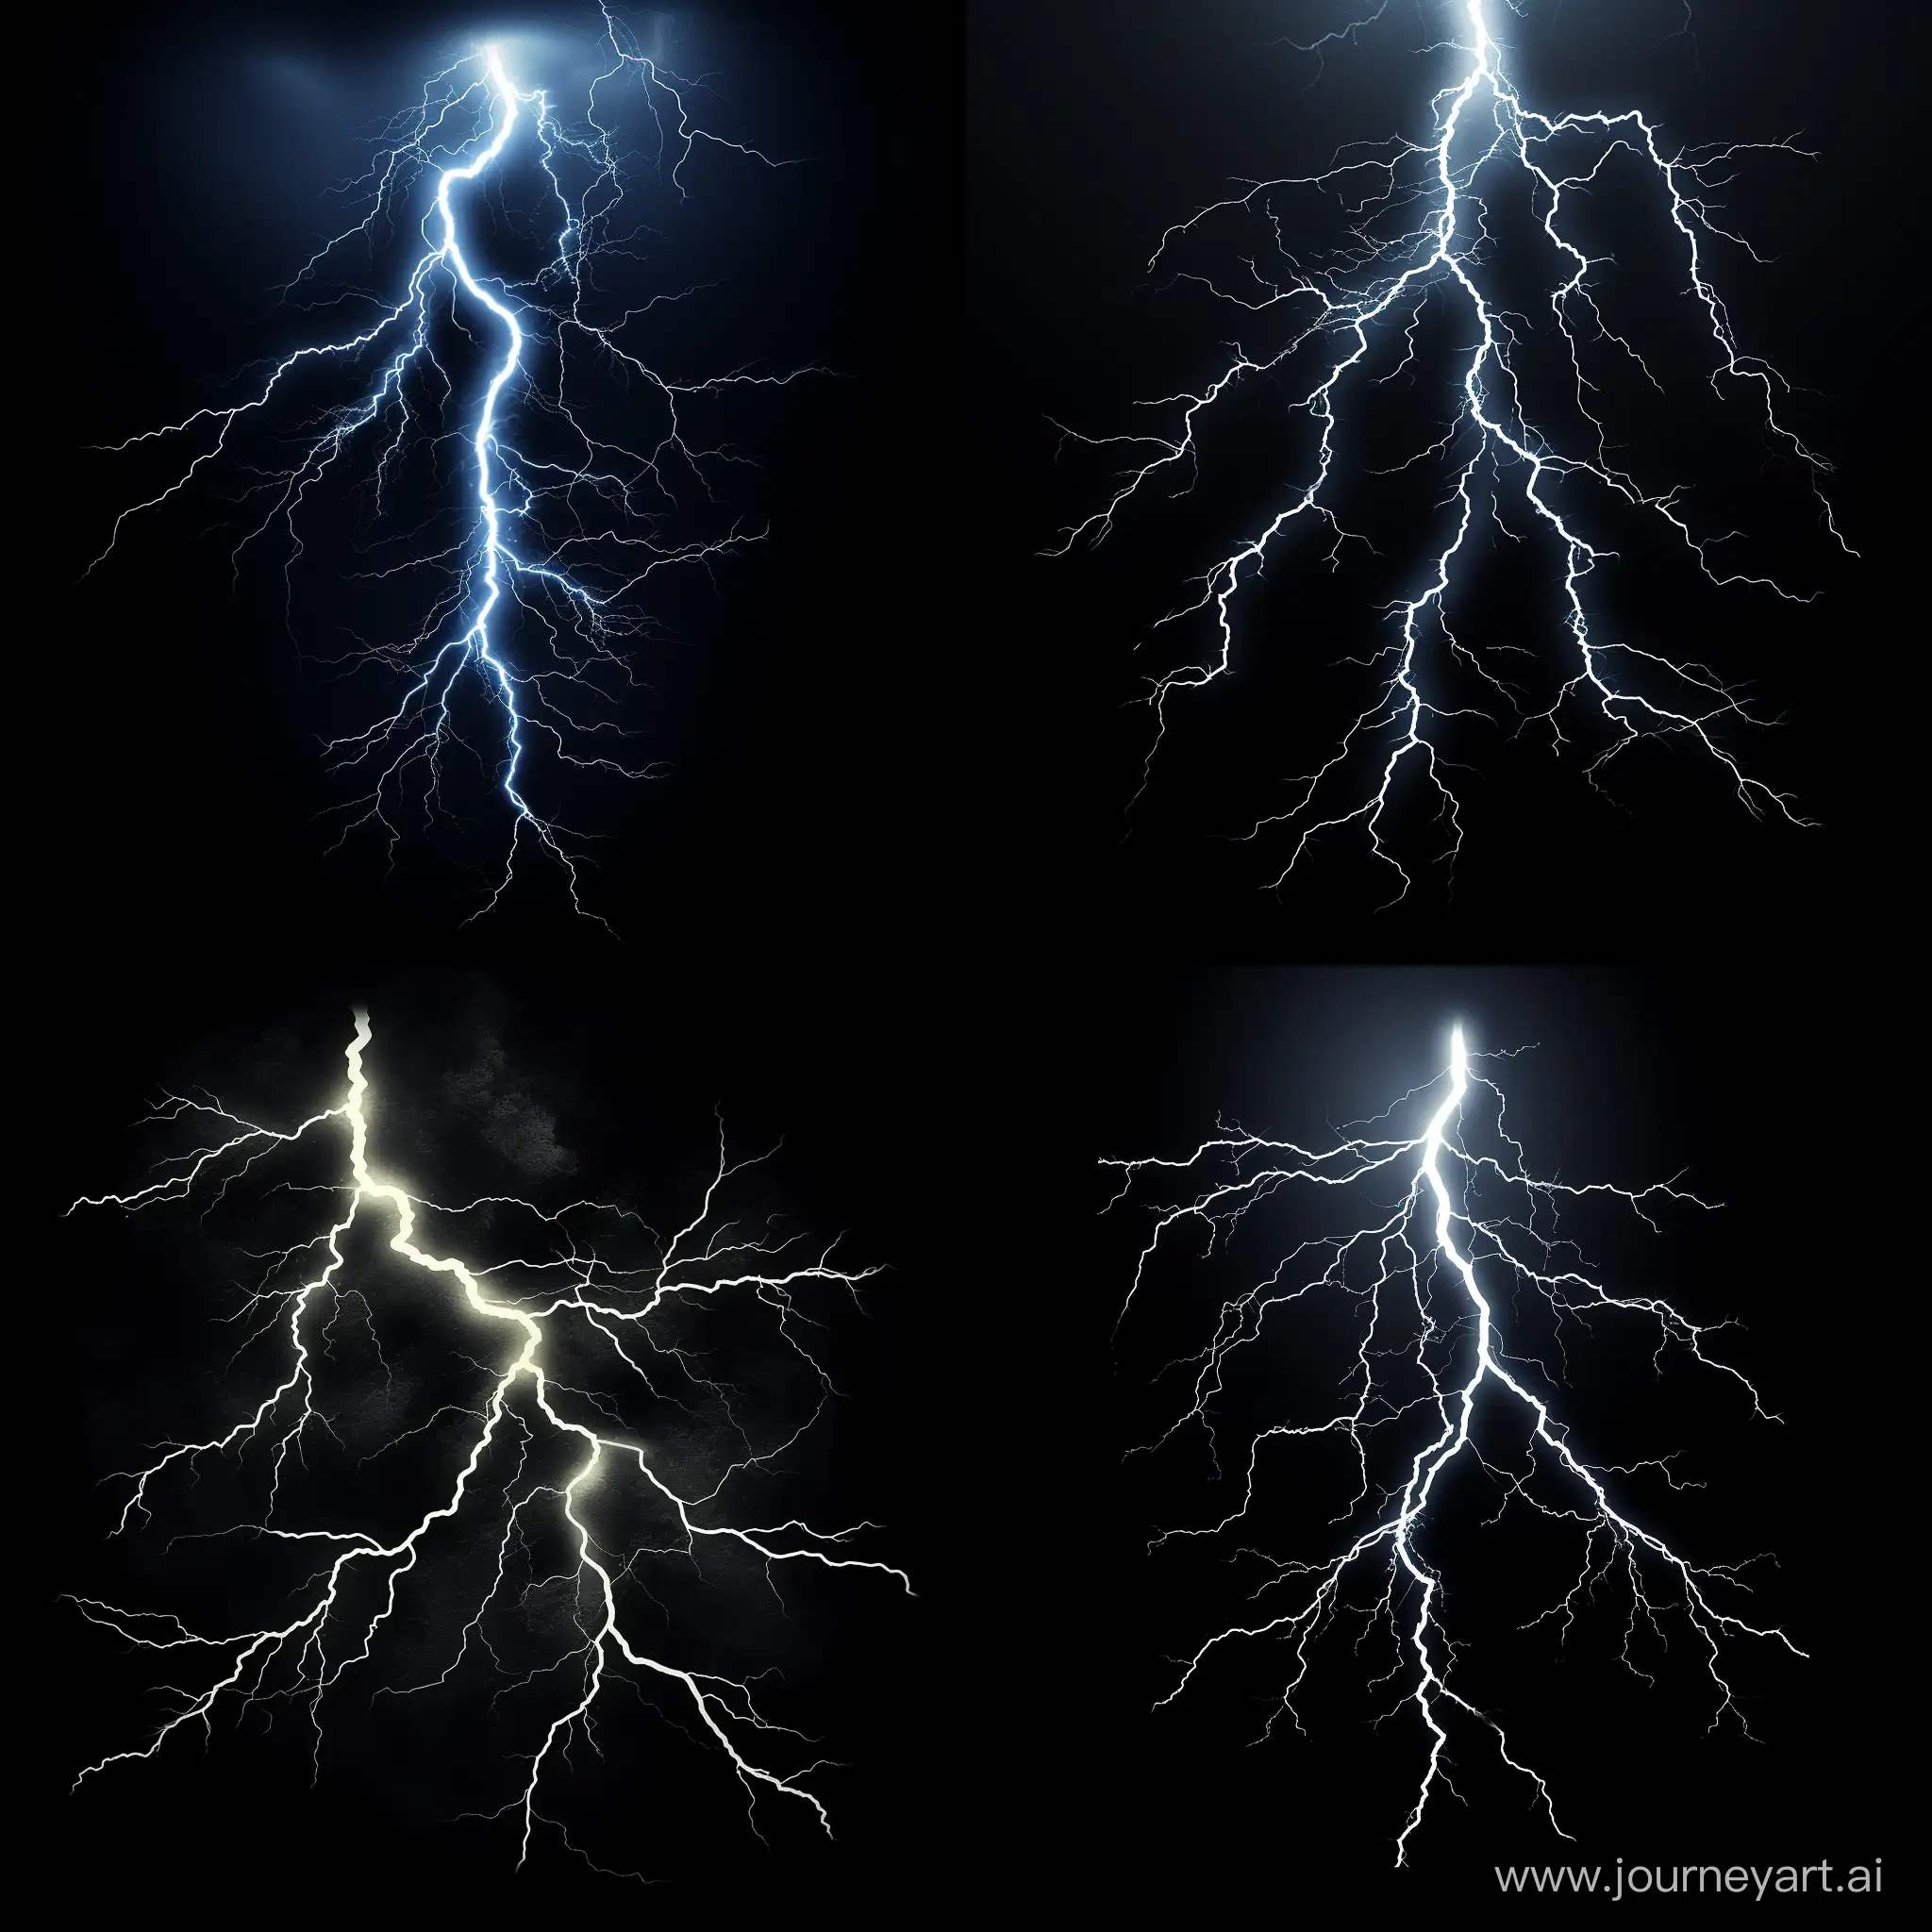 Dramatic-Lightning-Strikes-on-a-Mysterious-Black-Canvas